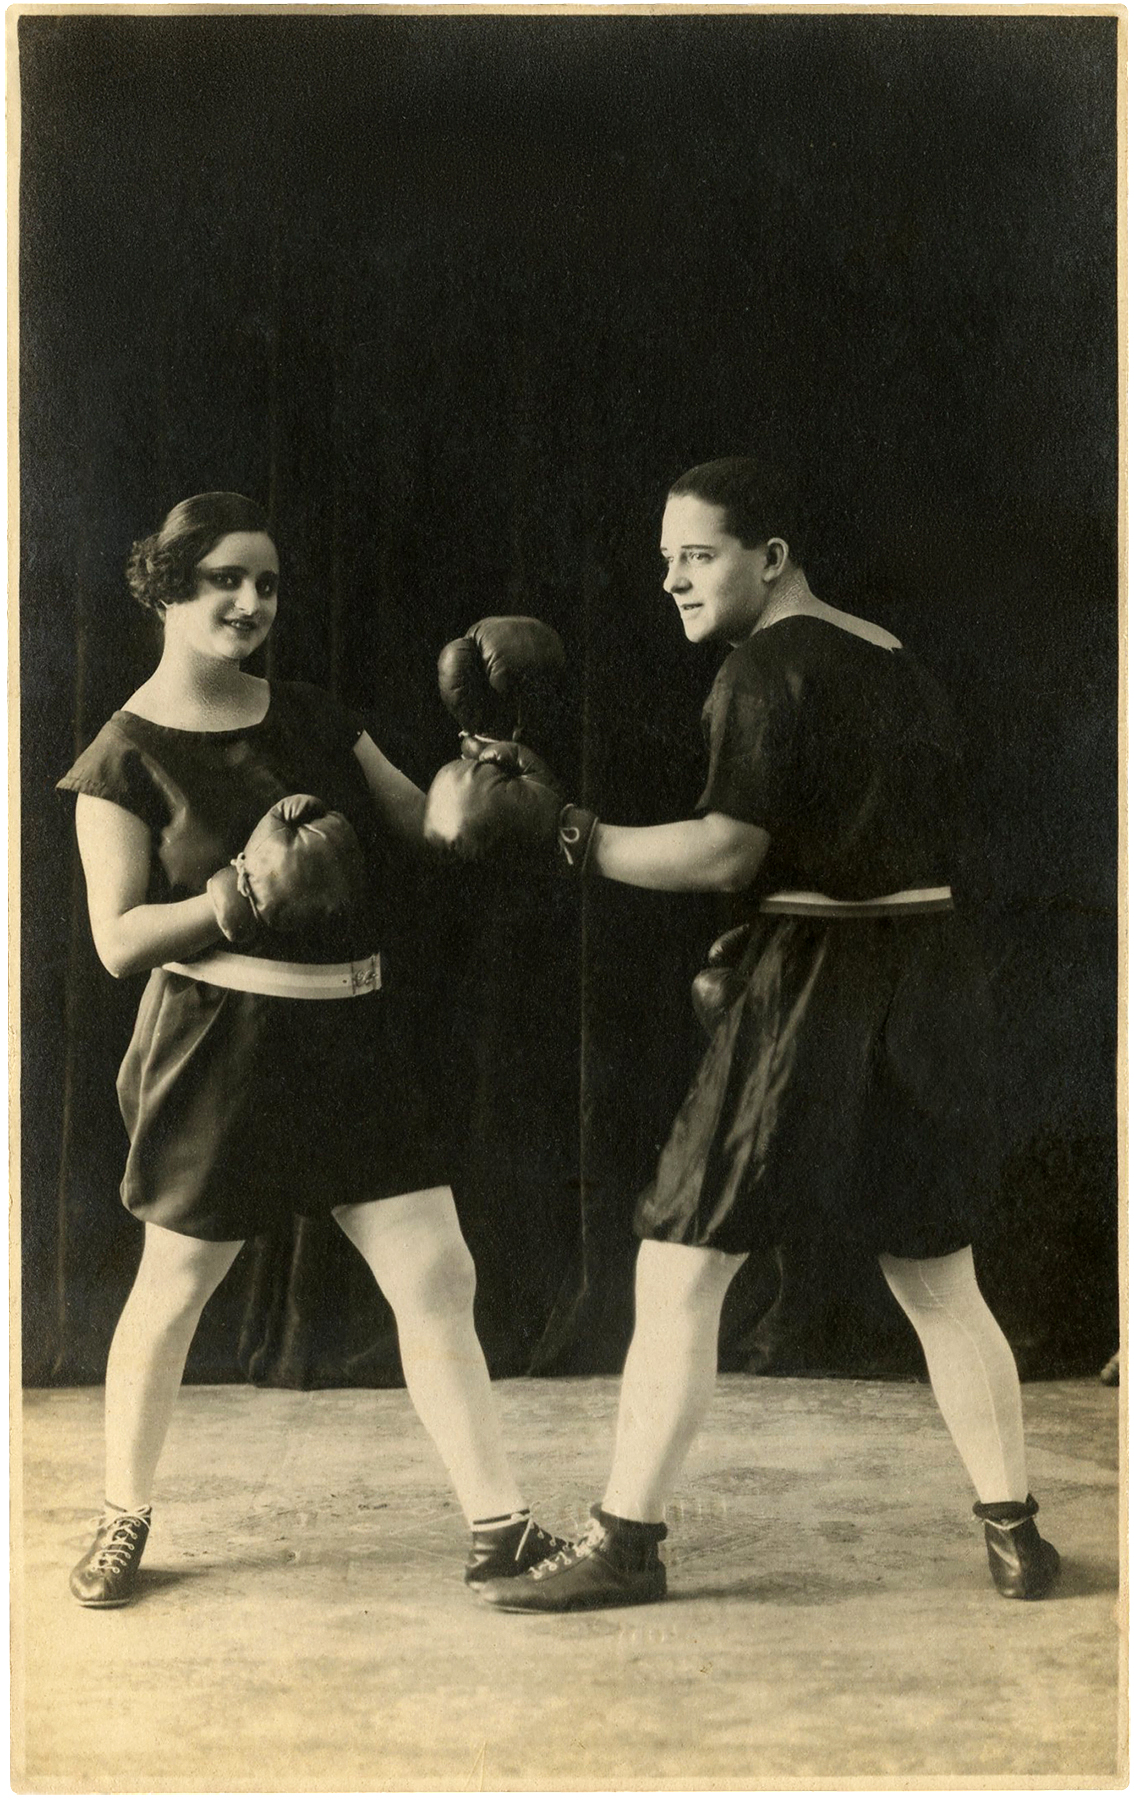 Vintage Man and Woman Boxing Photo - Funny! - The Graphics Fairy